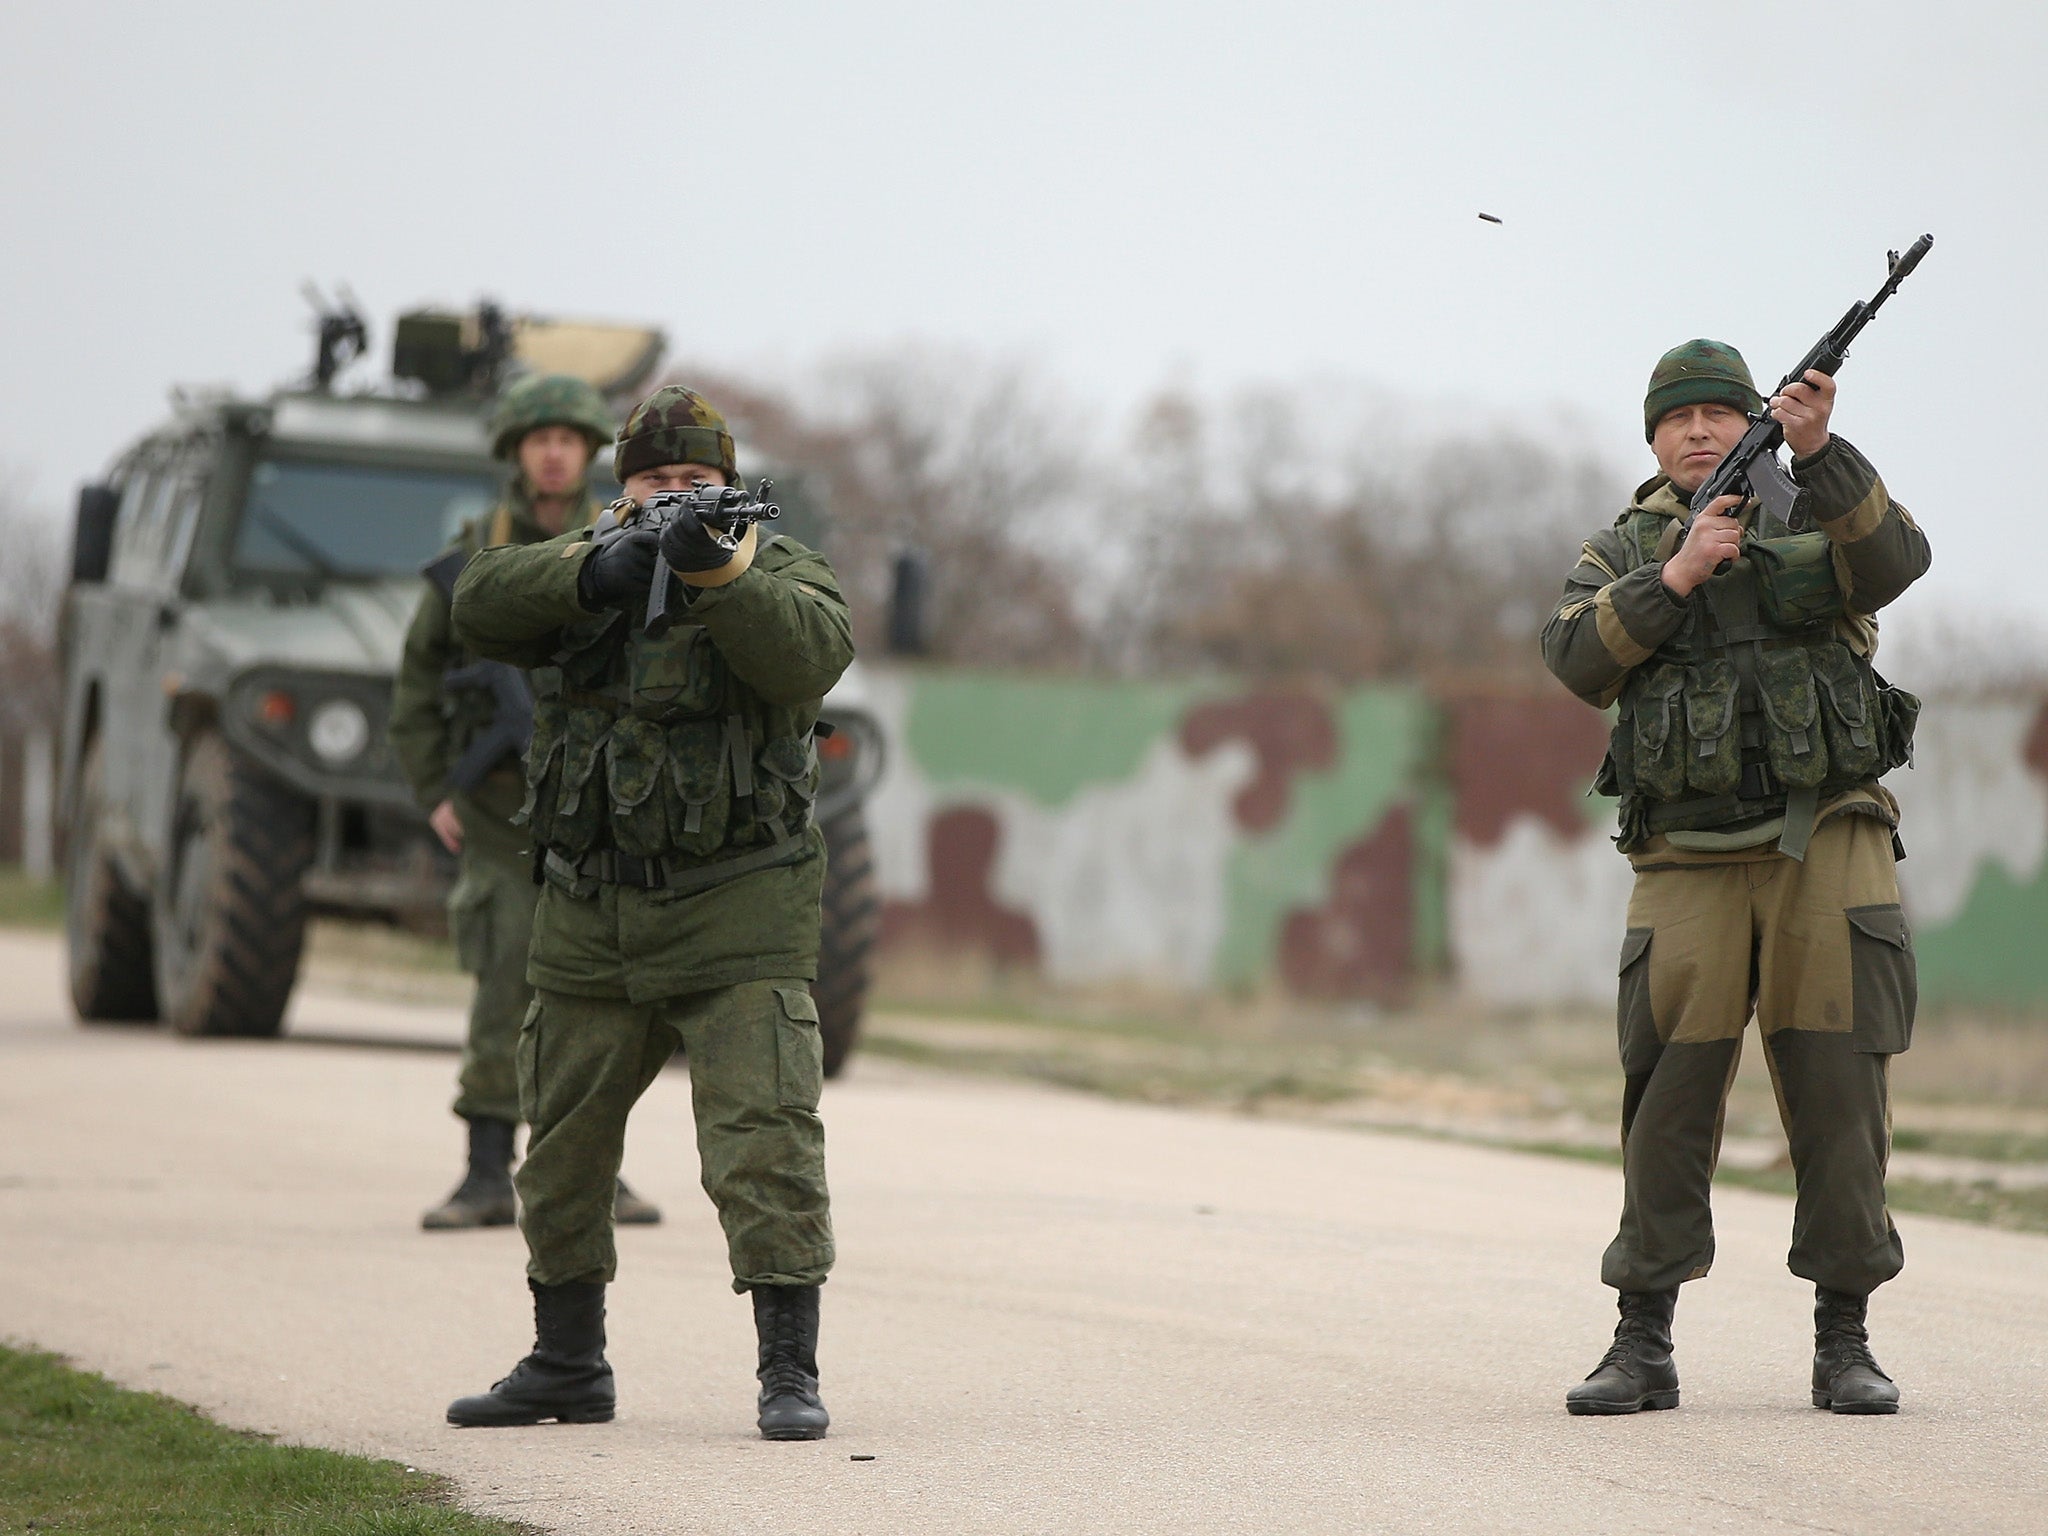 File image: Troops under Russian command fire weapons into the air as an approaching group of over 100 hundred unarmed Ukrainian troops at the Belbek airbase, which the Russian troops are occcupying in Crimea